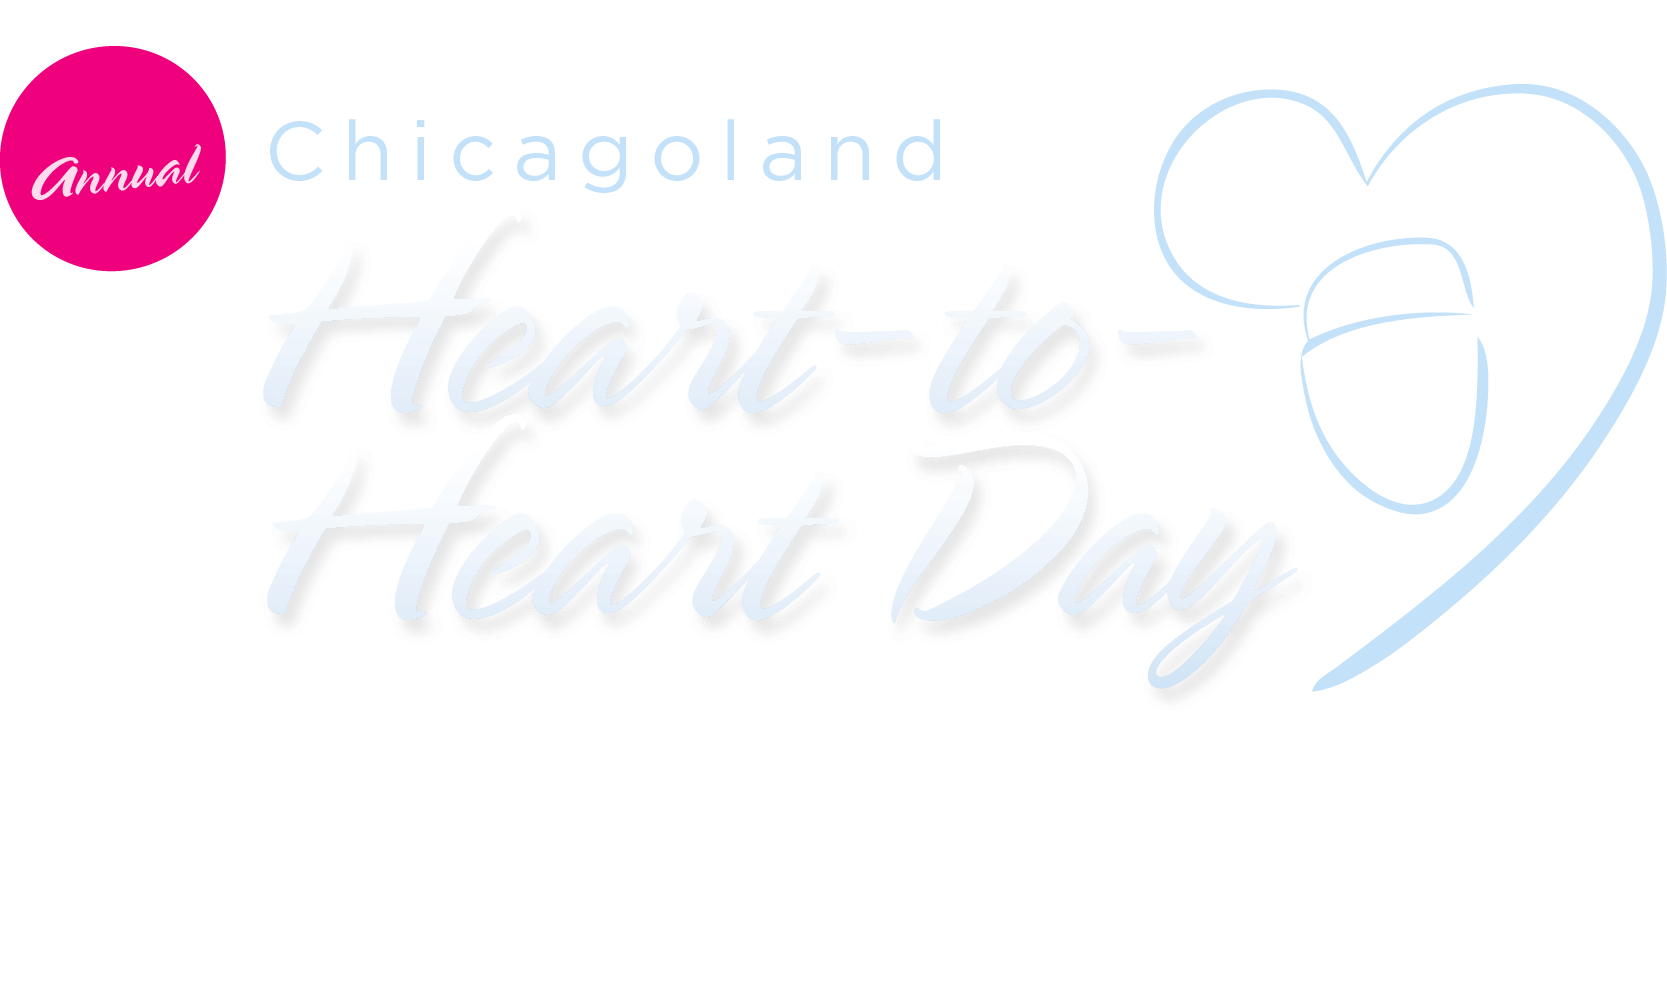 8th Annual Heart-to-Heart Day